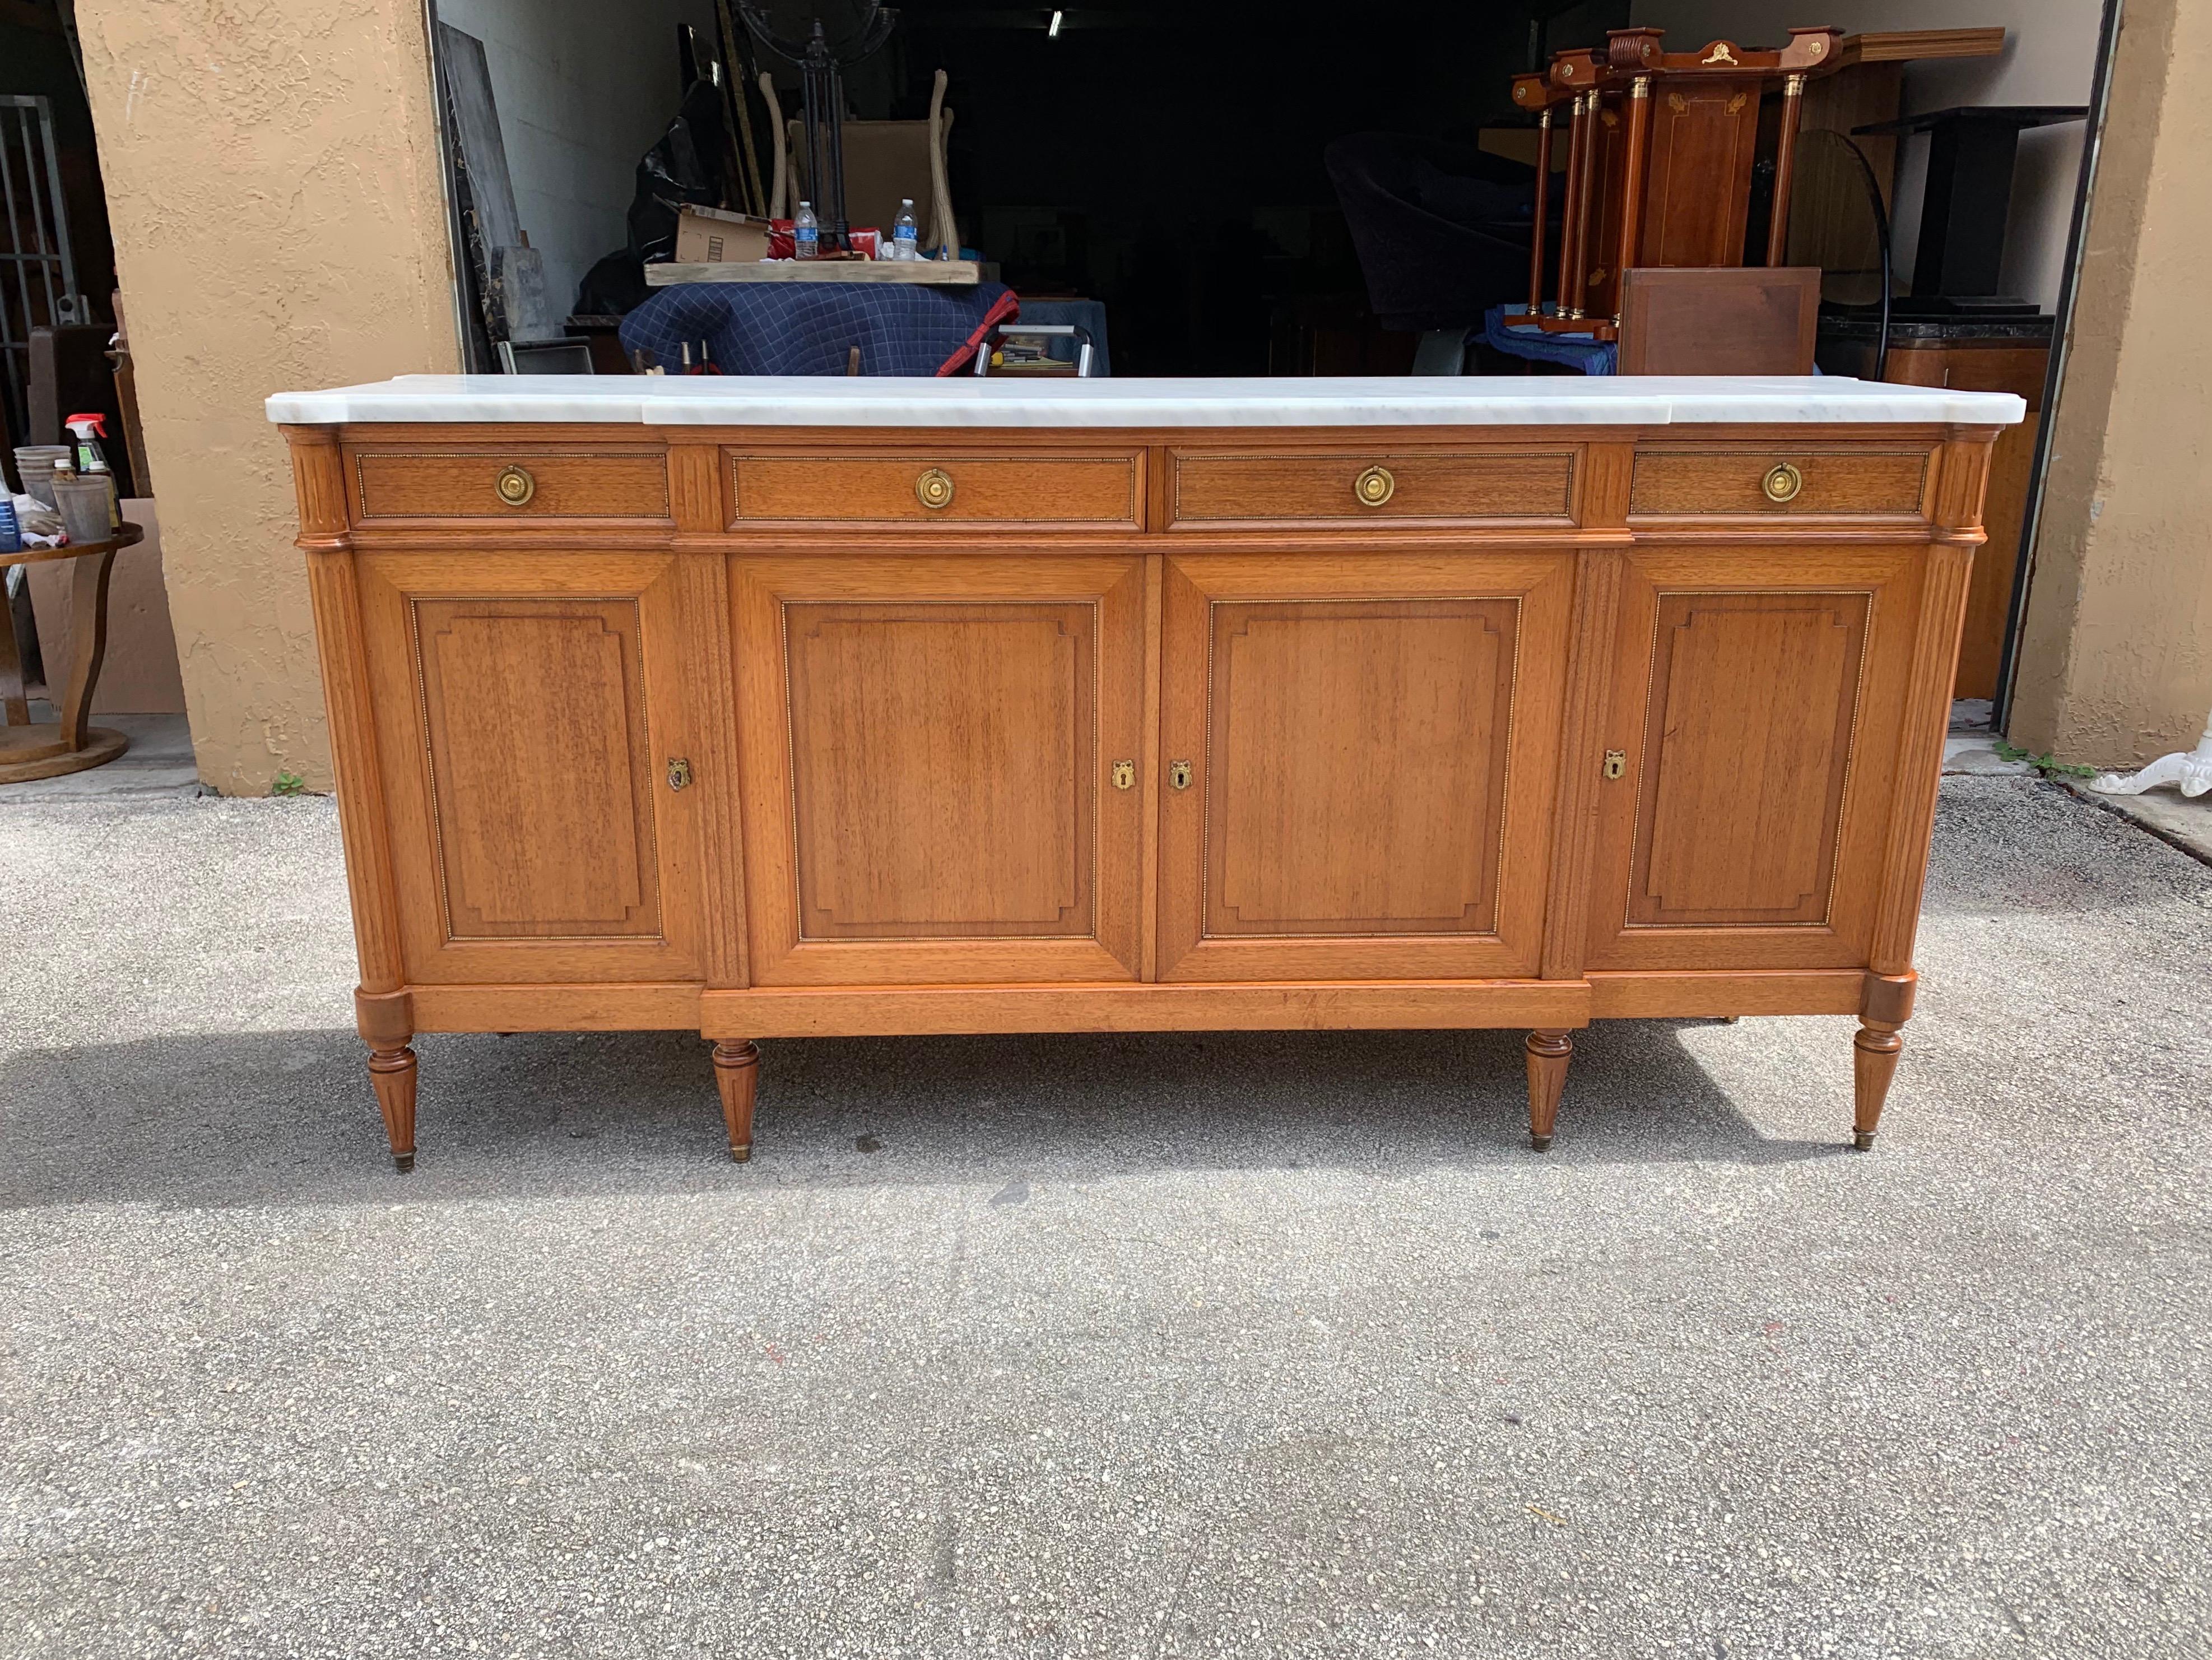 Fine French antique Louis XVI style sideboard or buffet made of mahogany with a beautiful Carrara marble top, the mahogany wood has been finished with a French polished high luster inside and outside, the buffet has 4 doors and 4 drawers with all 6